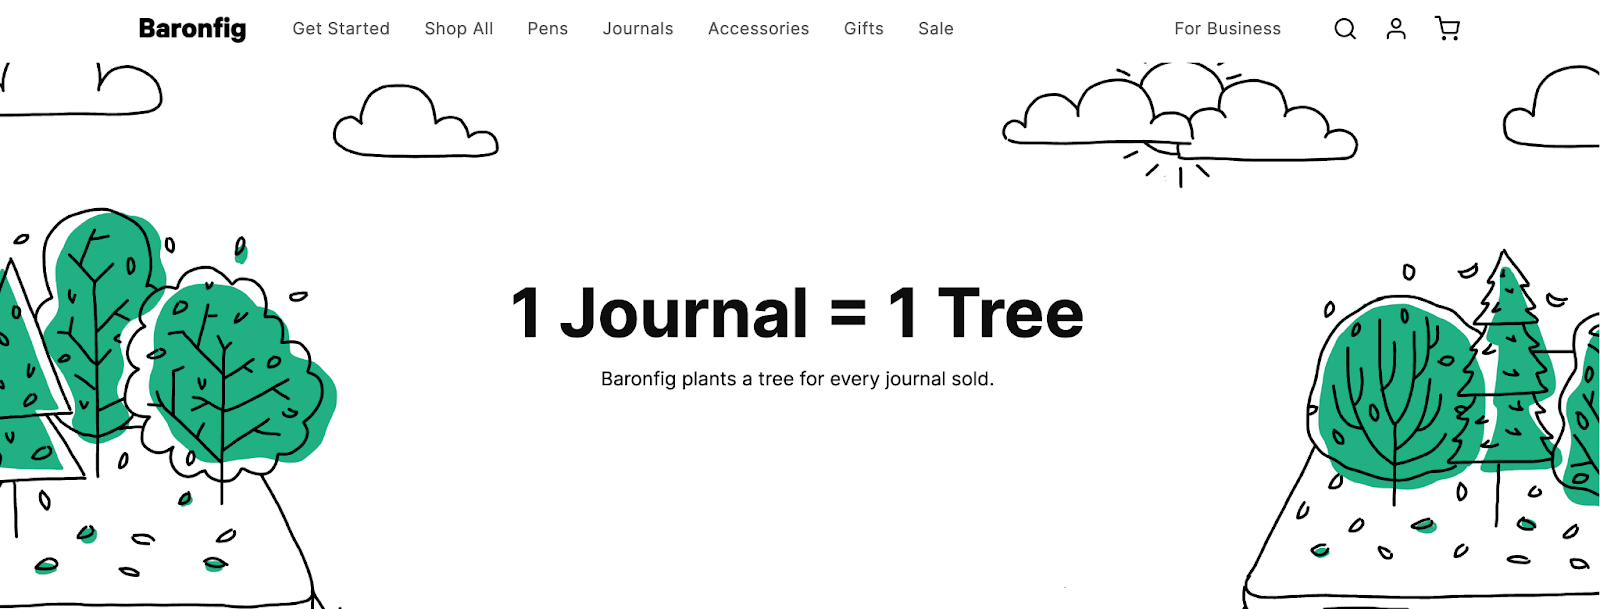 Baronfig plants a tree for every journal sold